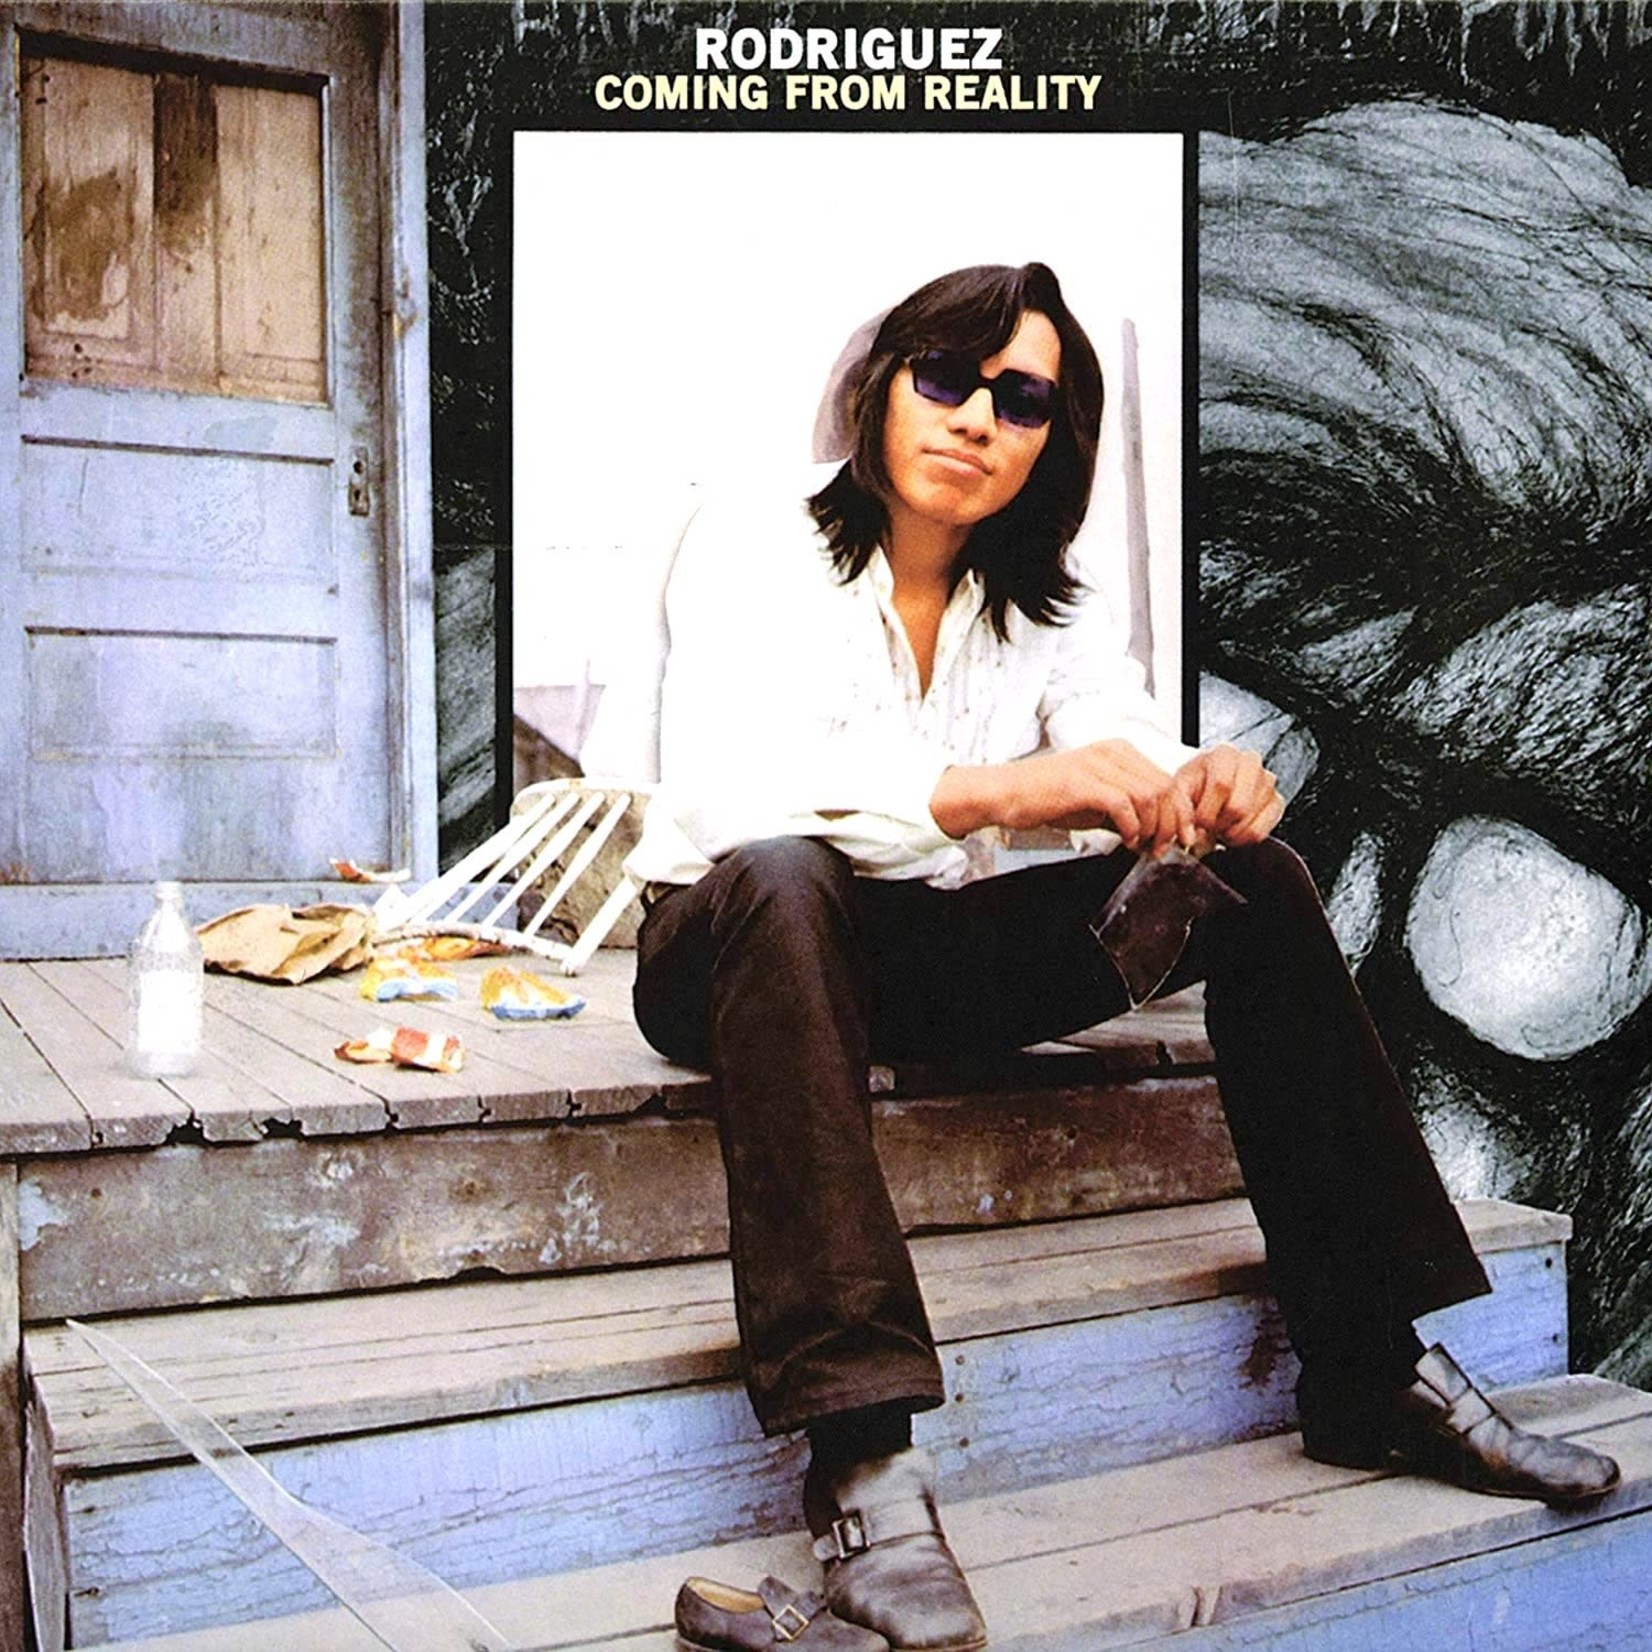 [New] Rodriguez - Coming From Reality